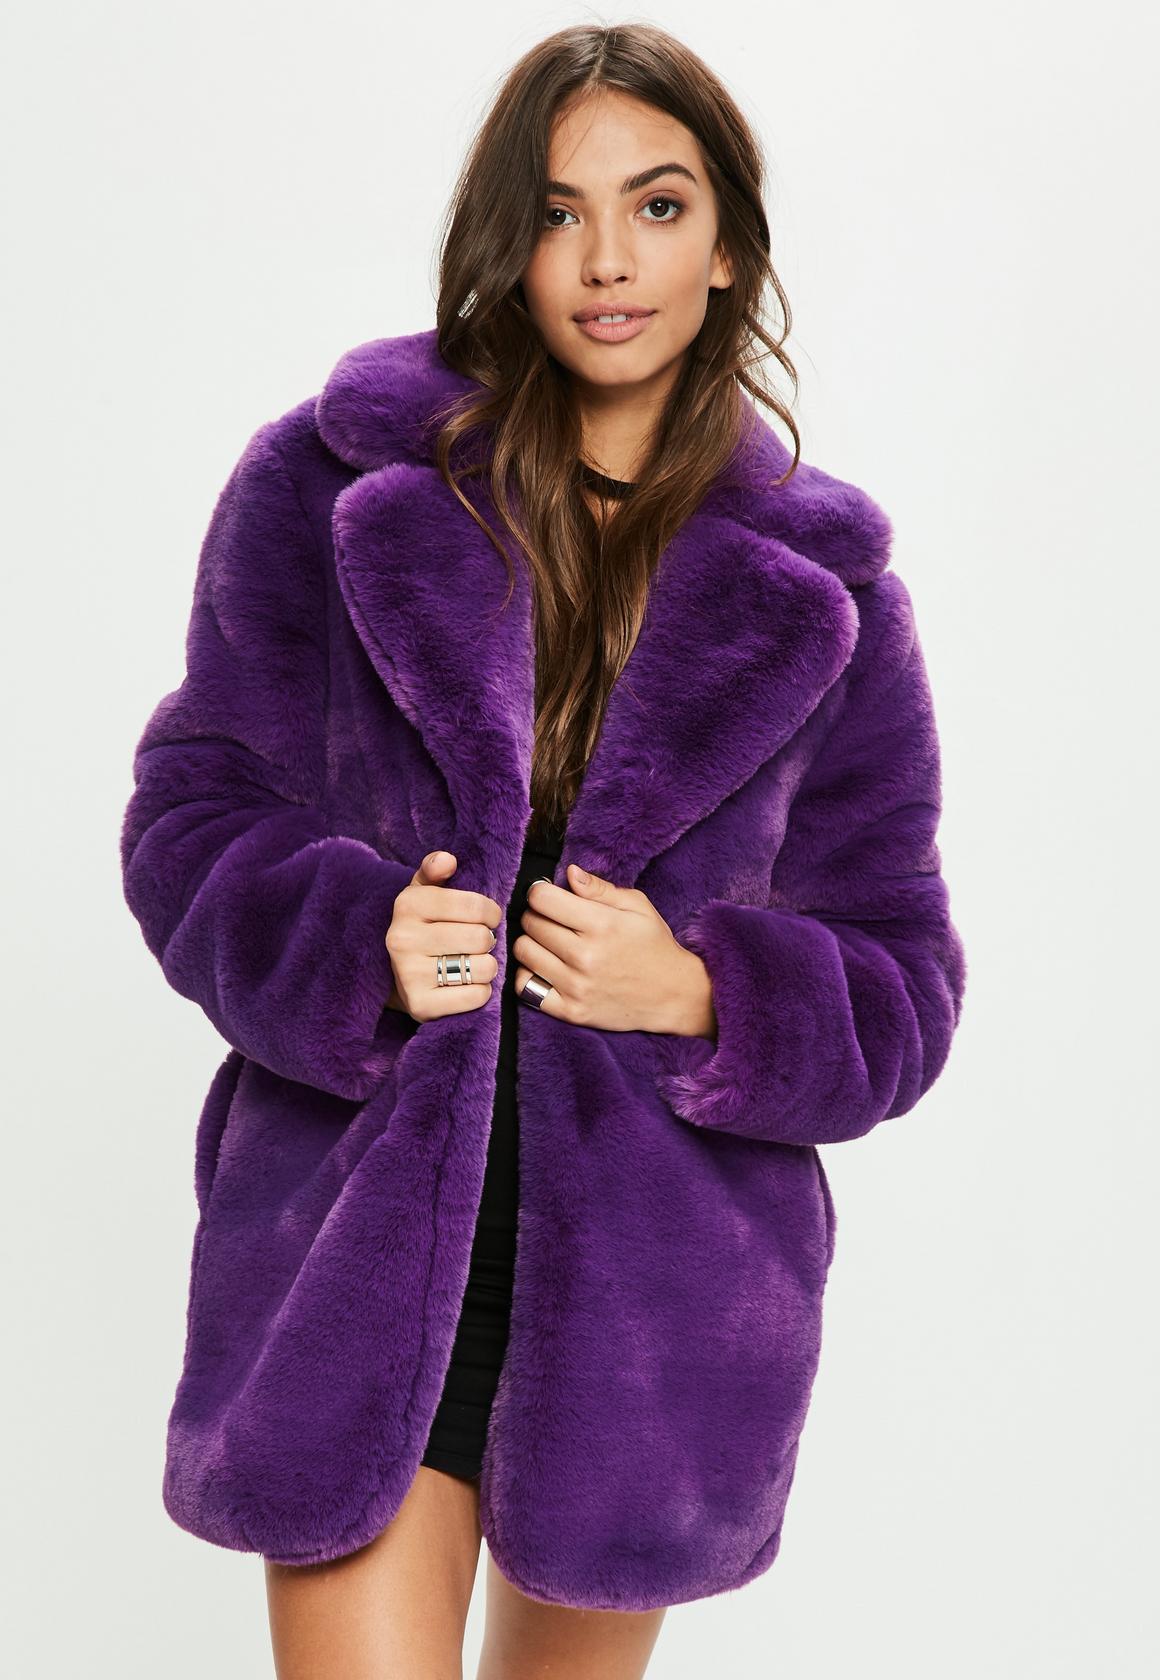 cloutfit misguided fur coat 110